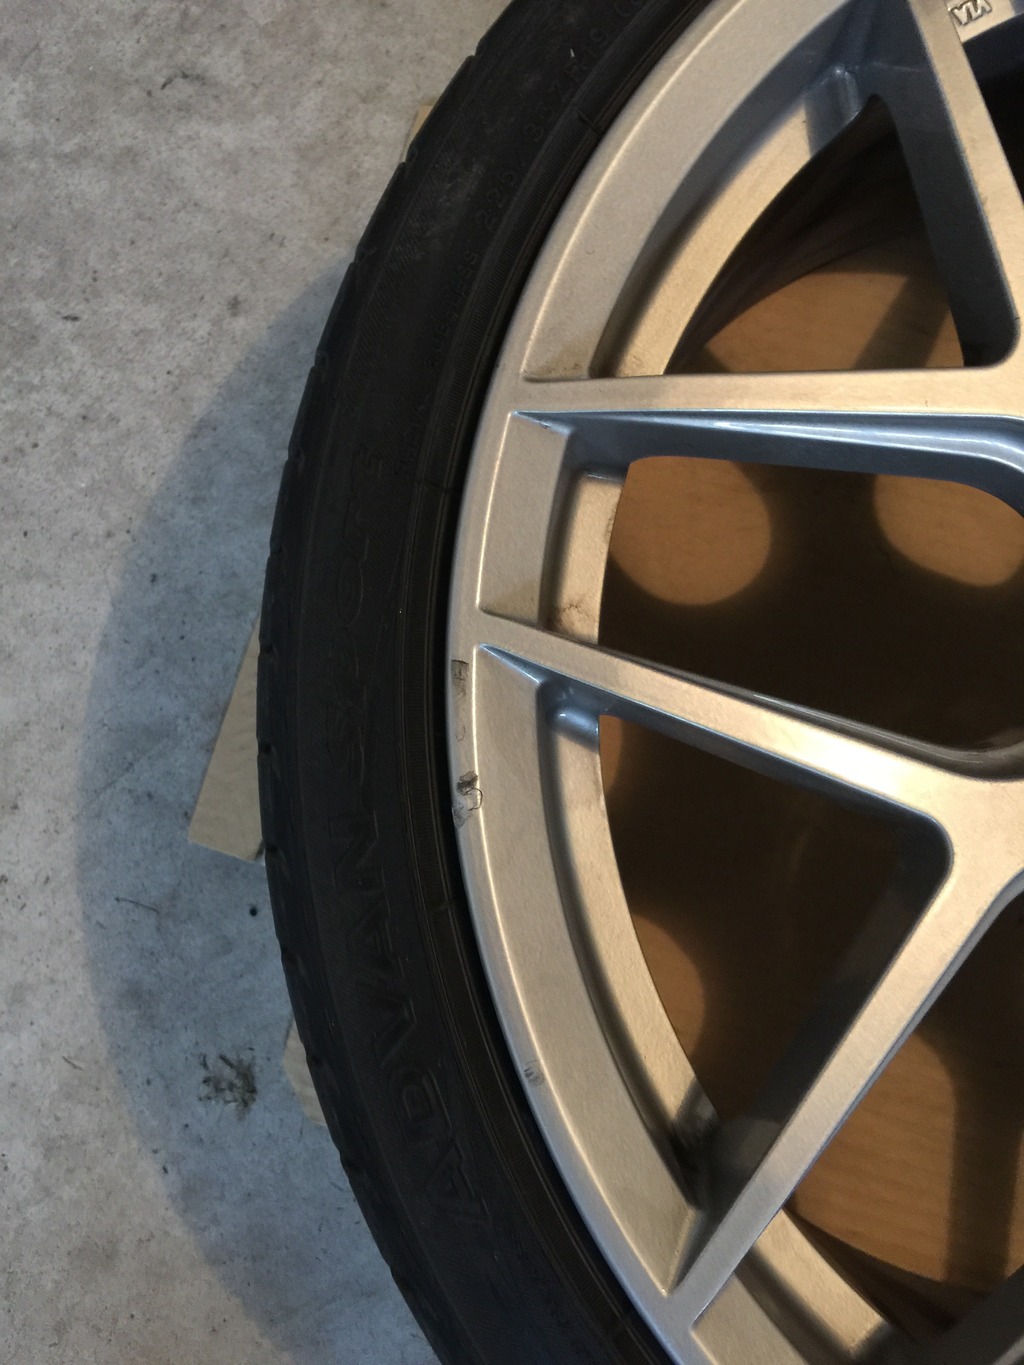 HRE WHEELS FOR SALE - 19 INCH WITH TIRES! - MBWorld.org Forums